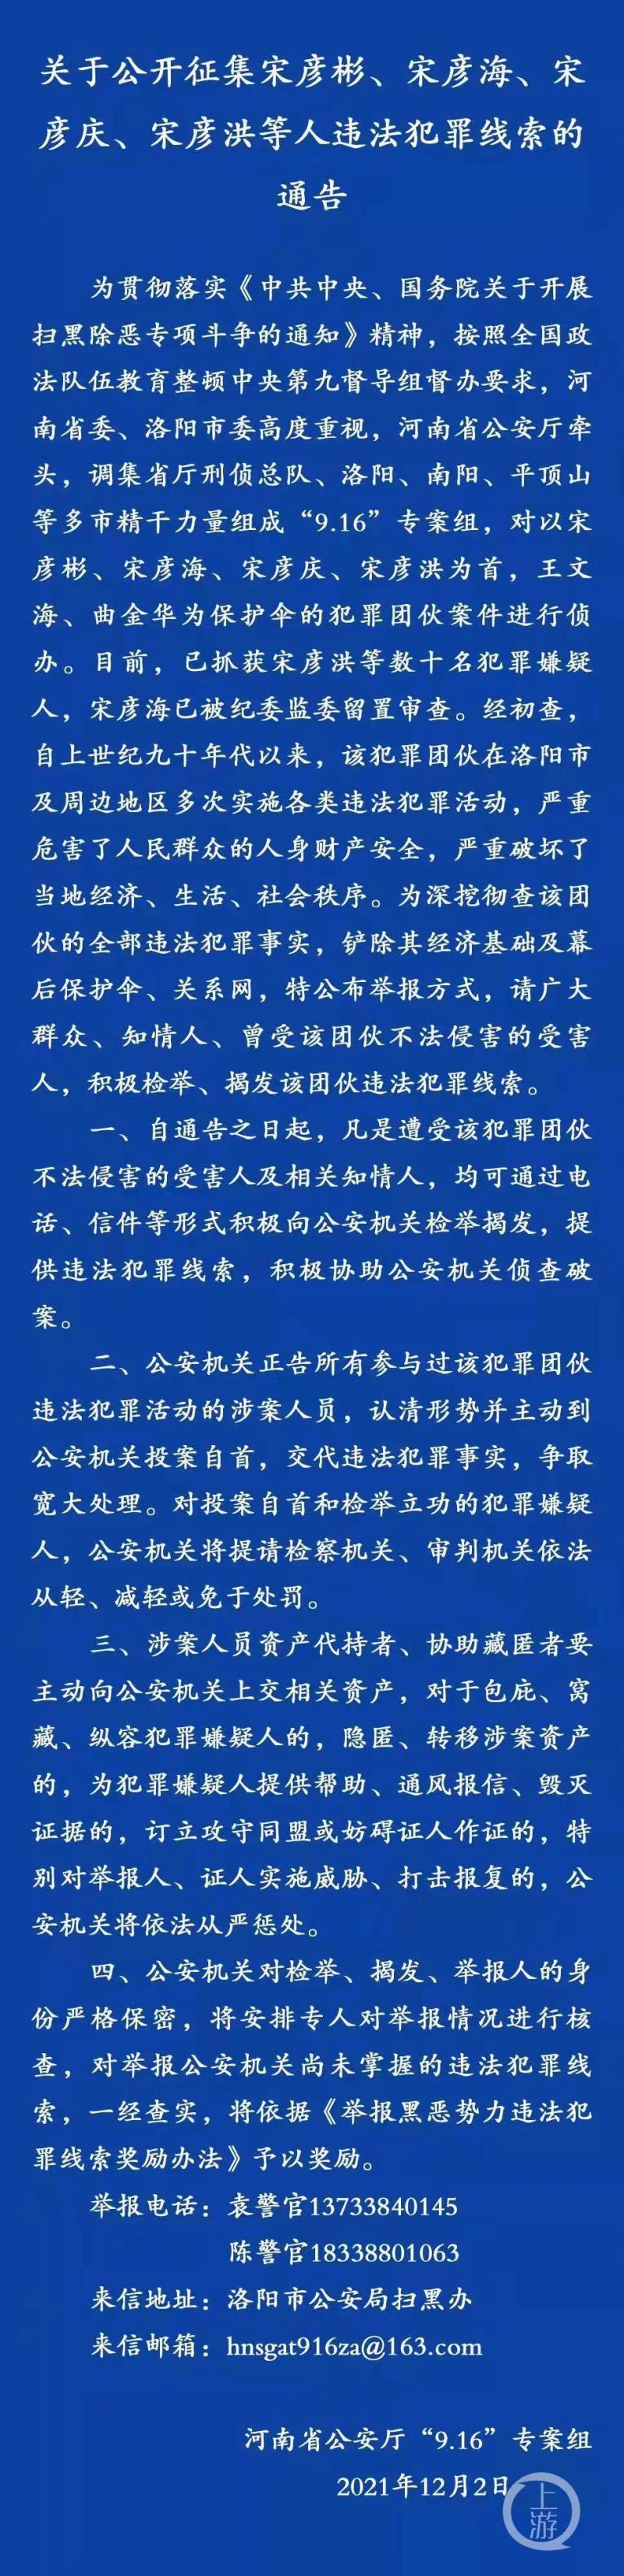 The political commissar of Luoyang Municipal Bureau who was arrested and forced to confess by torture in prison, the former director of the judicial department instructed fake "Central Commission for Discipline Inspection cadres" to form a special task force for torture and forced confessions | Song family | cultural relics | Jinhua | interrogation | Guo Zhengwei | special task force | Wang Wenhai